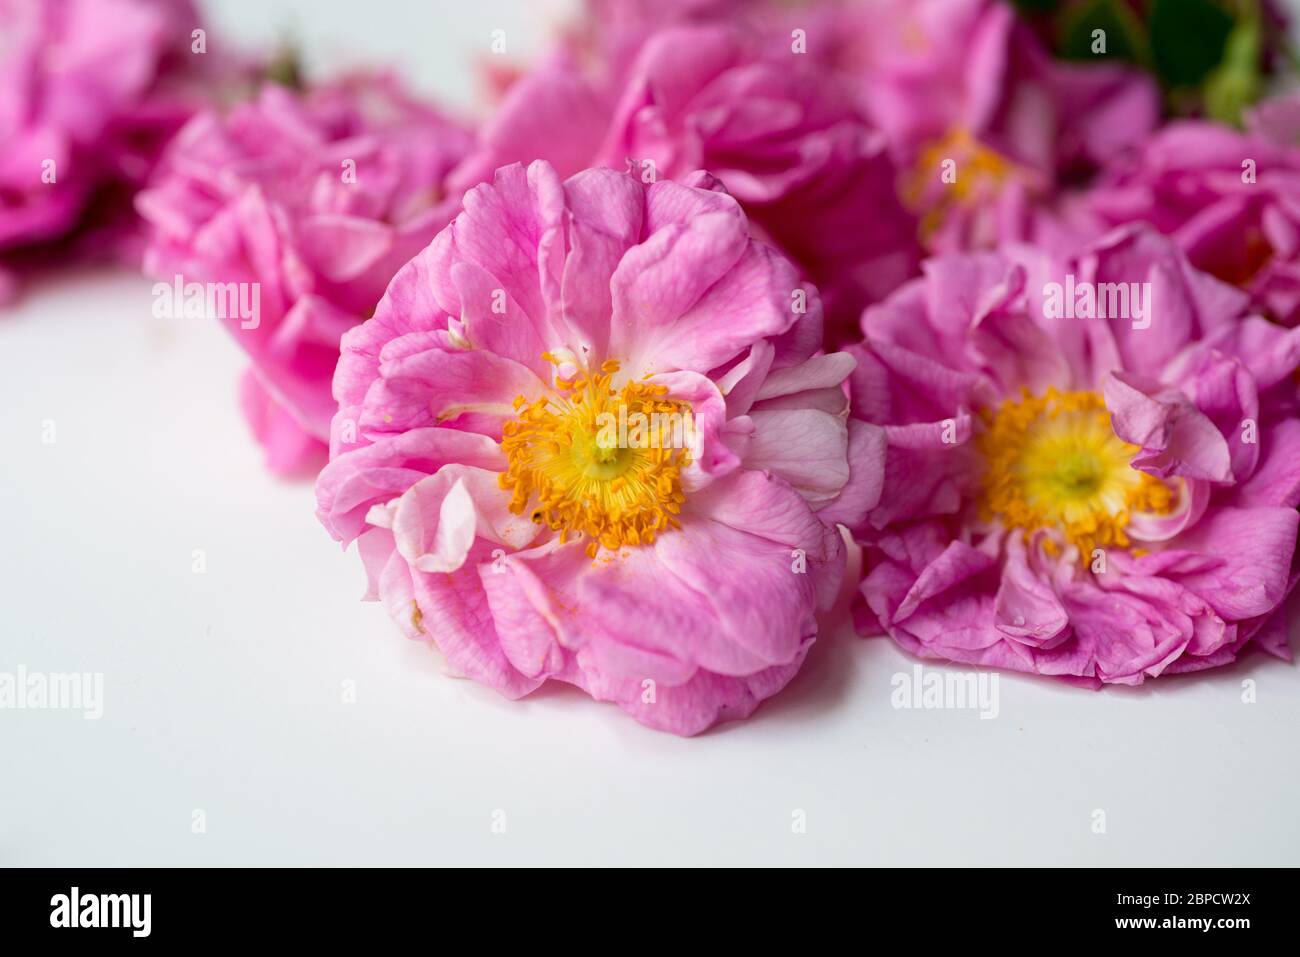 Close-up of fresh picked blossoms of organically grown Damask Roses (Rosa damascena) Stock Photo